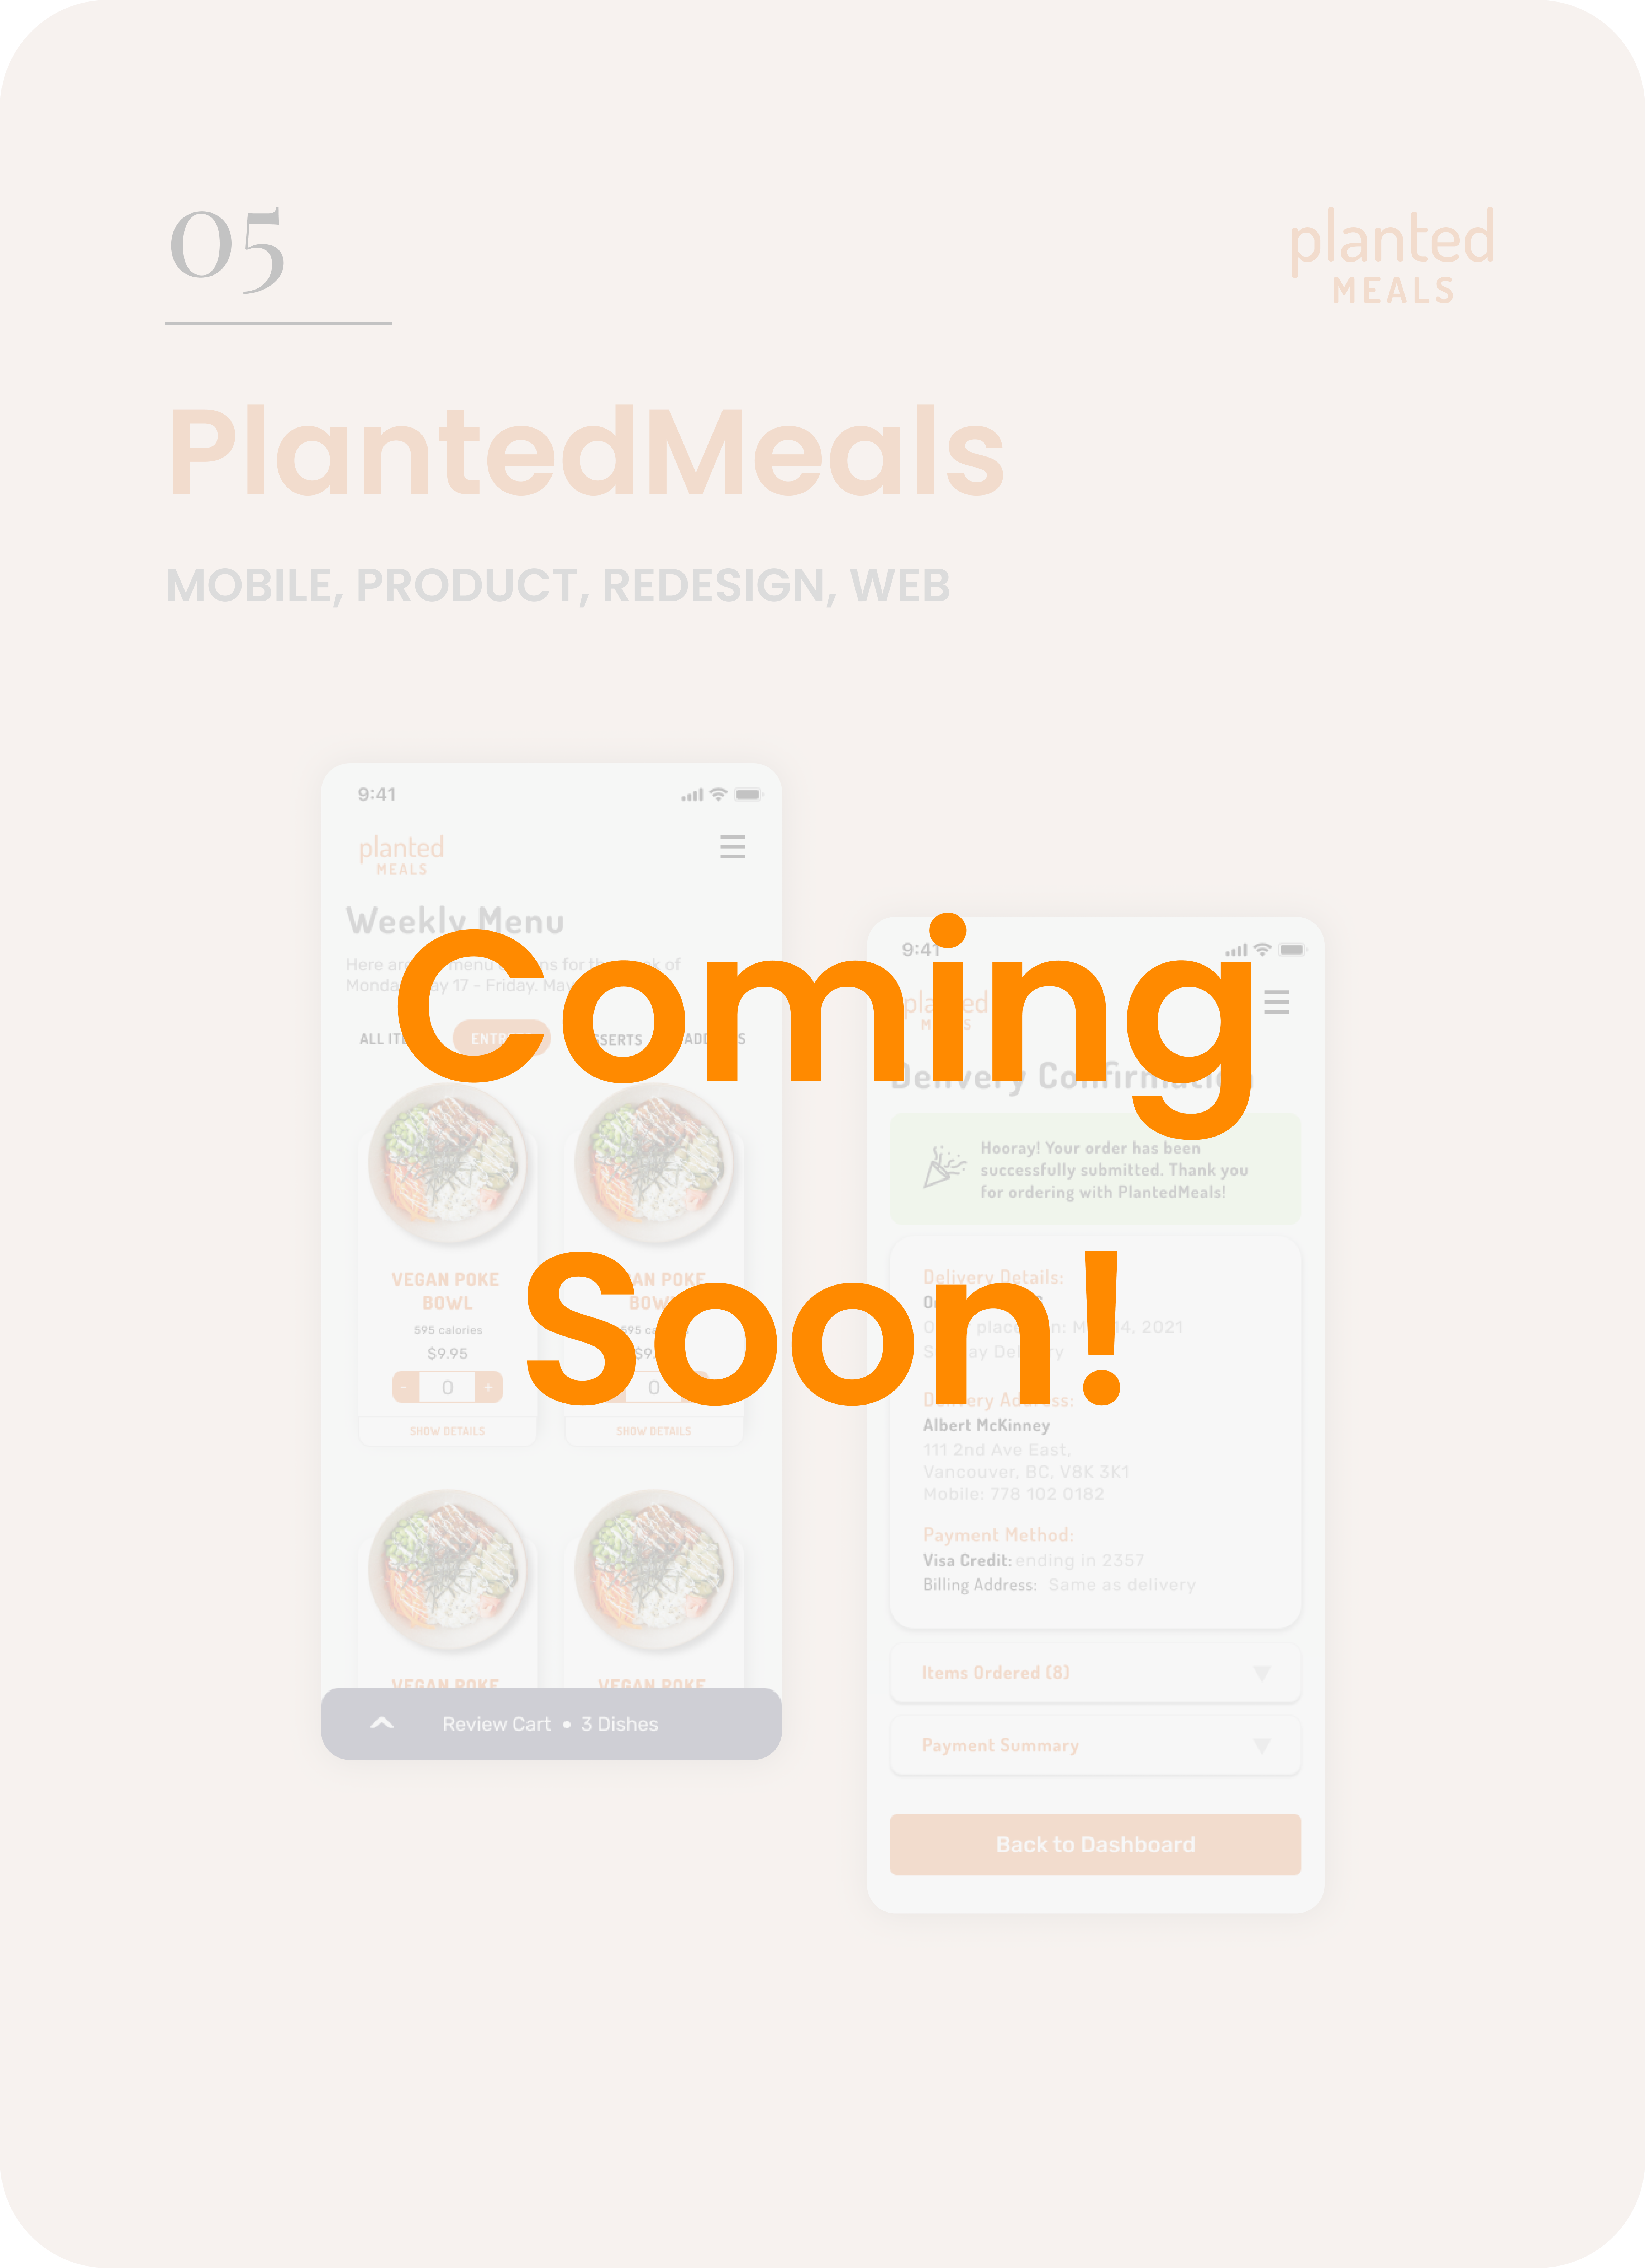 Planted-Meals